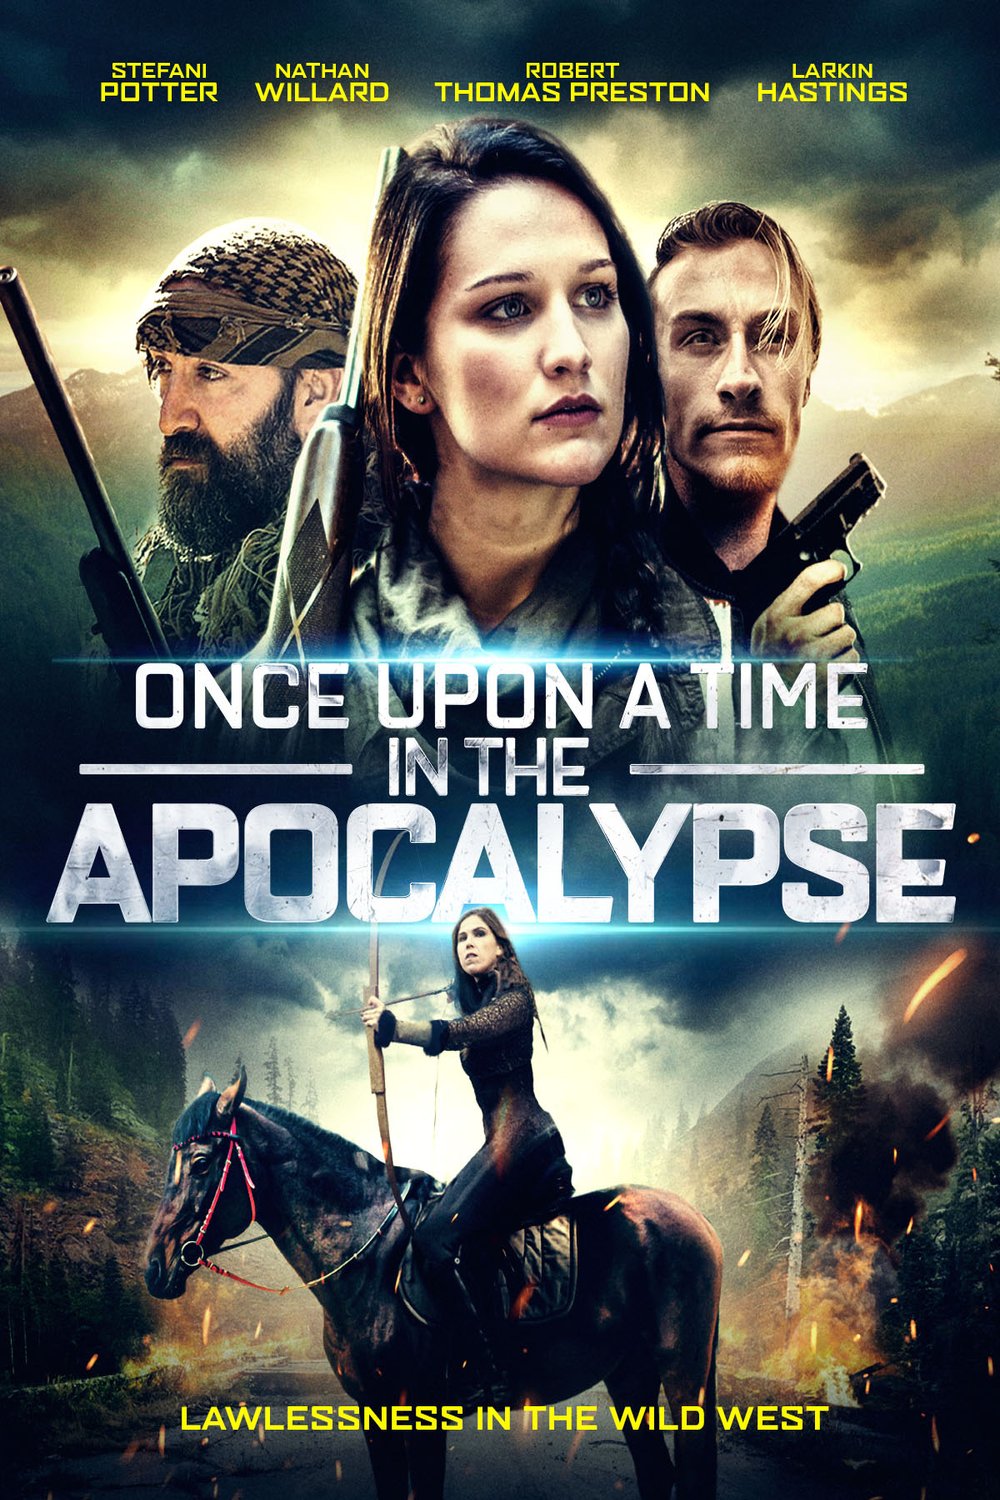 Once Upon a Time in the Apocalypse (2021) by Nathan Willard